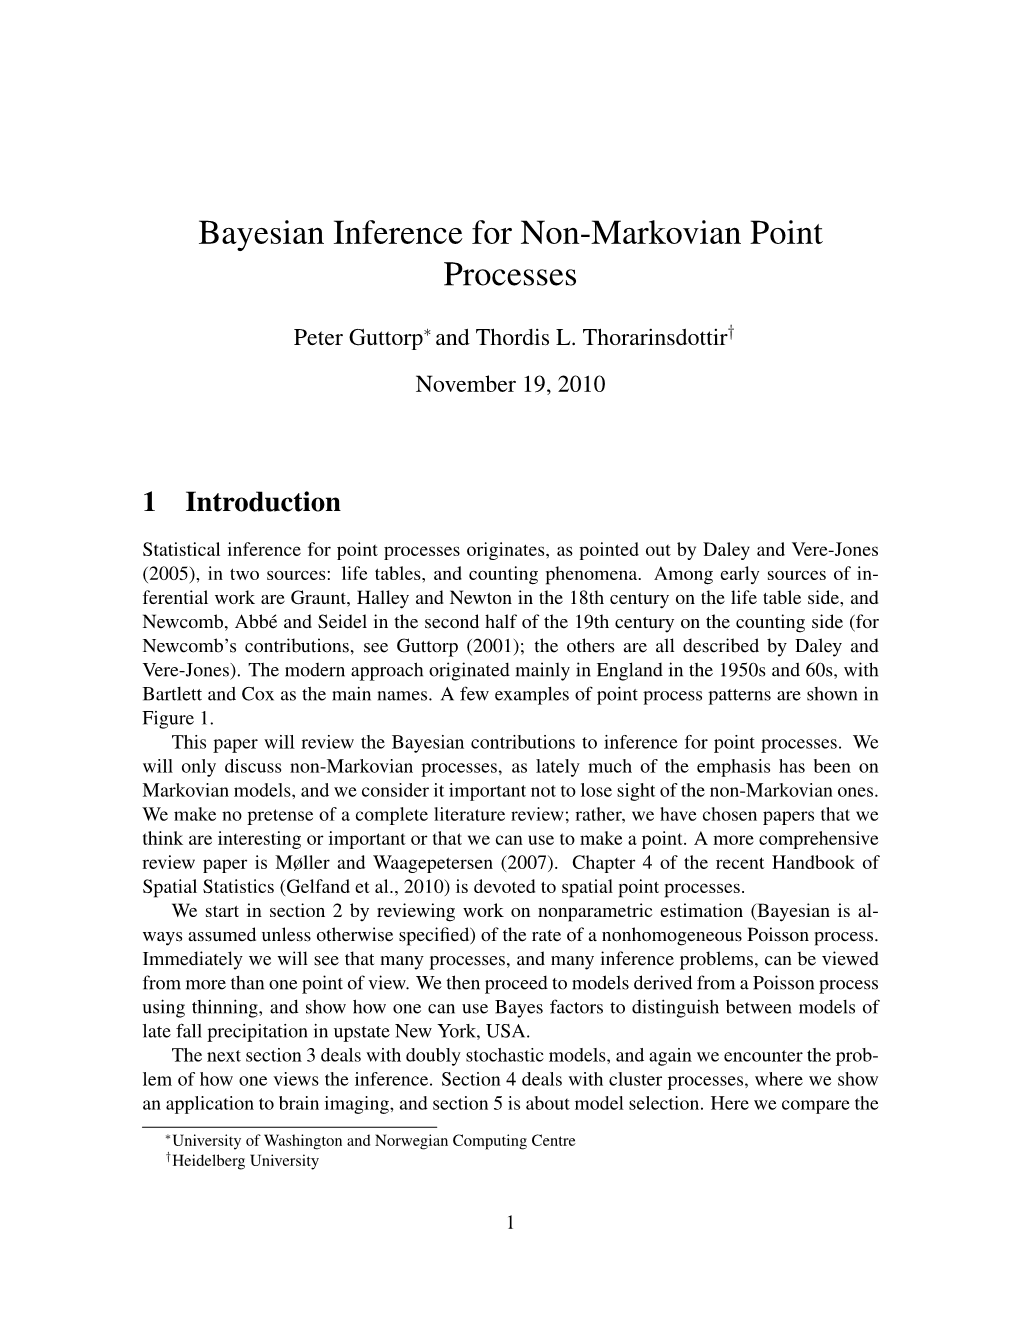 Bayesian Inference for Non-Markovian Point Processes